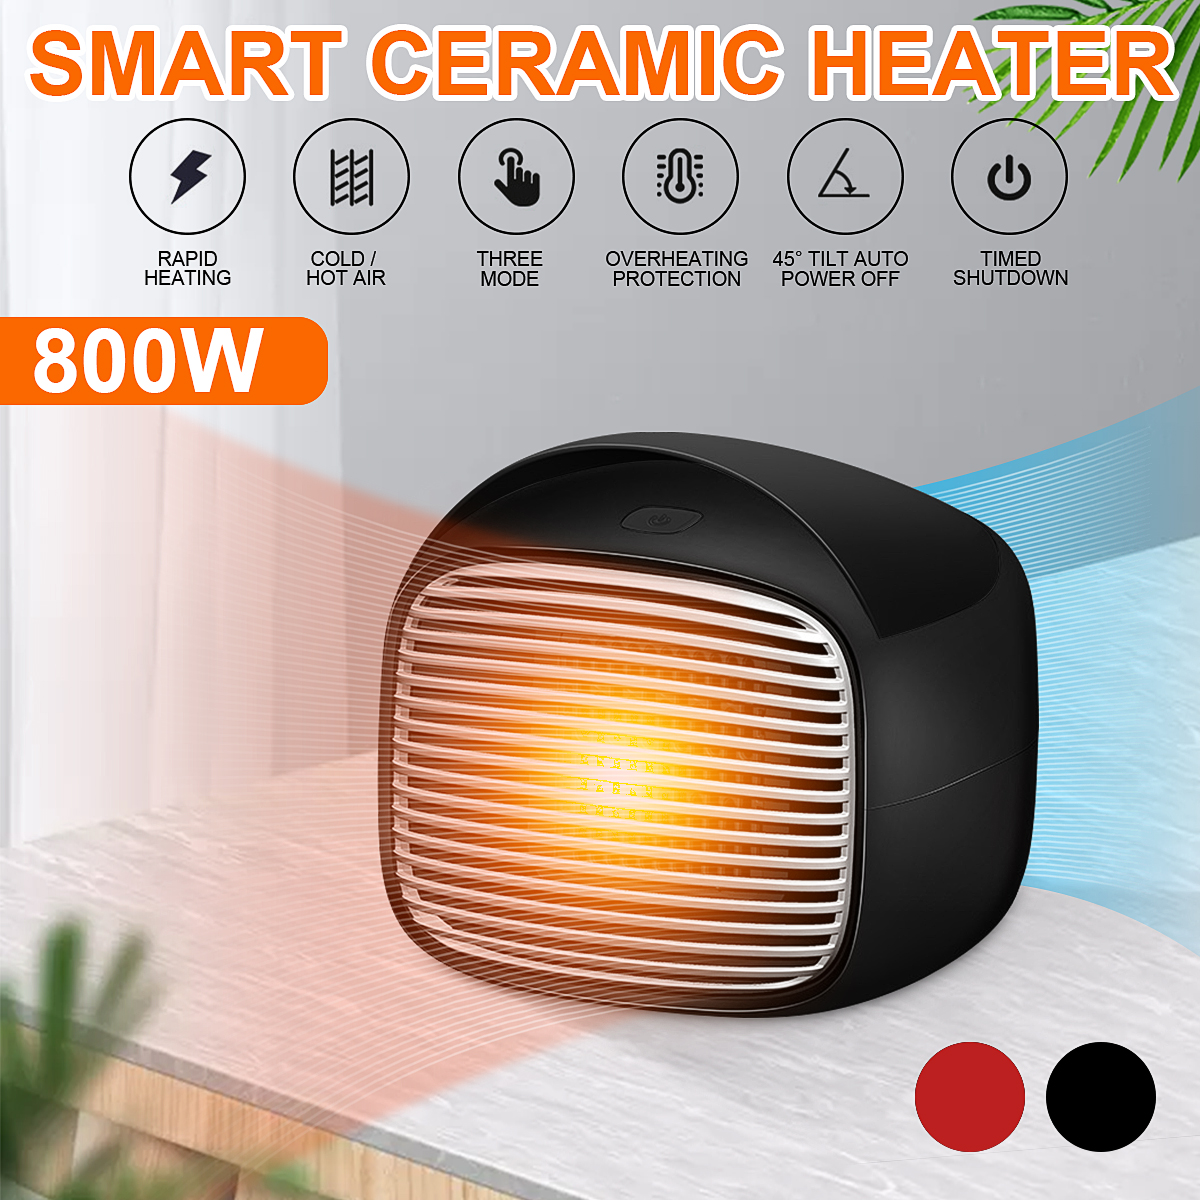 800W-110V220V-Mini-Ceramic-Electric-Heater-Home-Office-Space-Heating-WarmCold-Fan-Silent-1620936-2